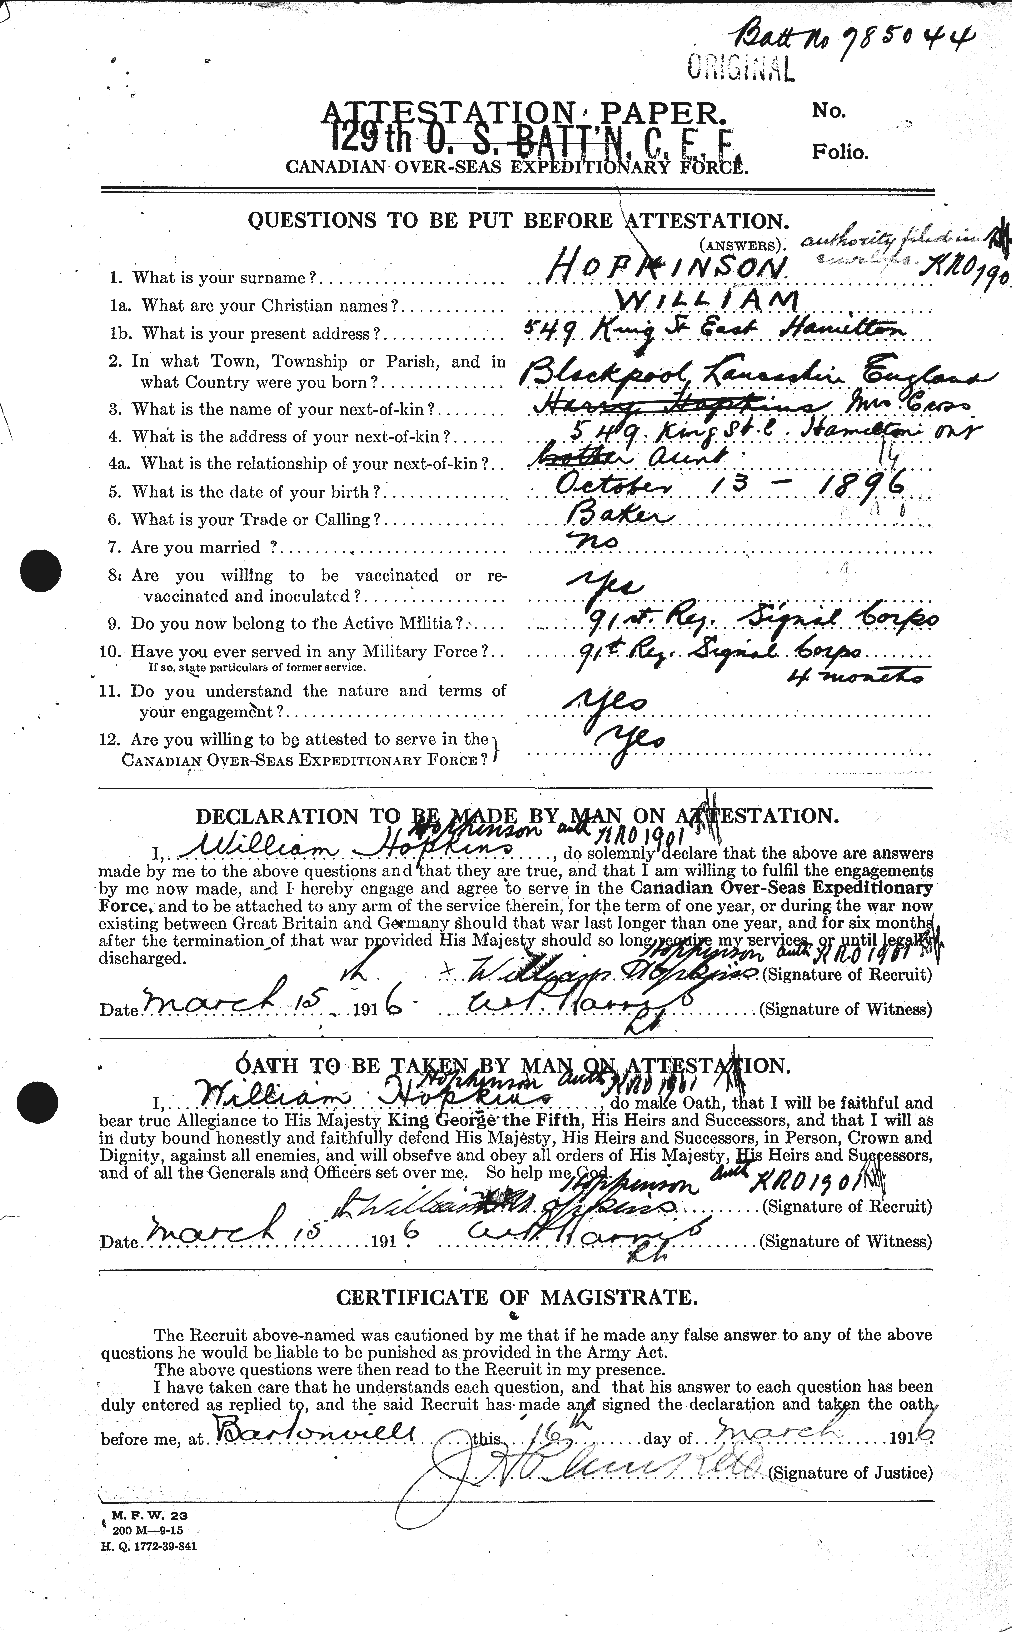 Personnel Records of the First World War - CEF 406262a